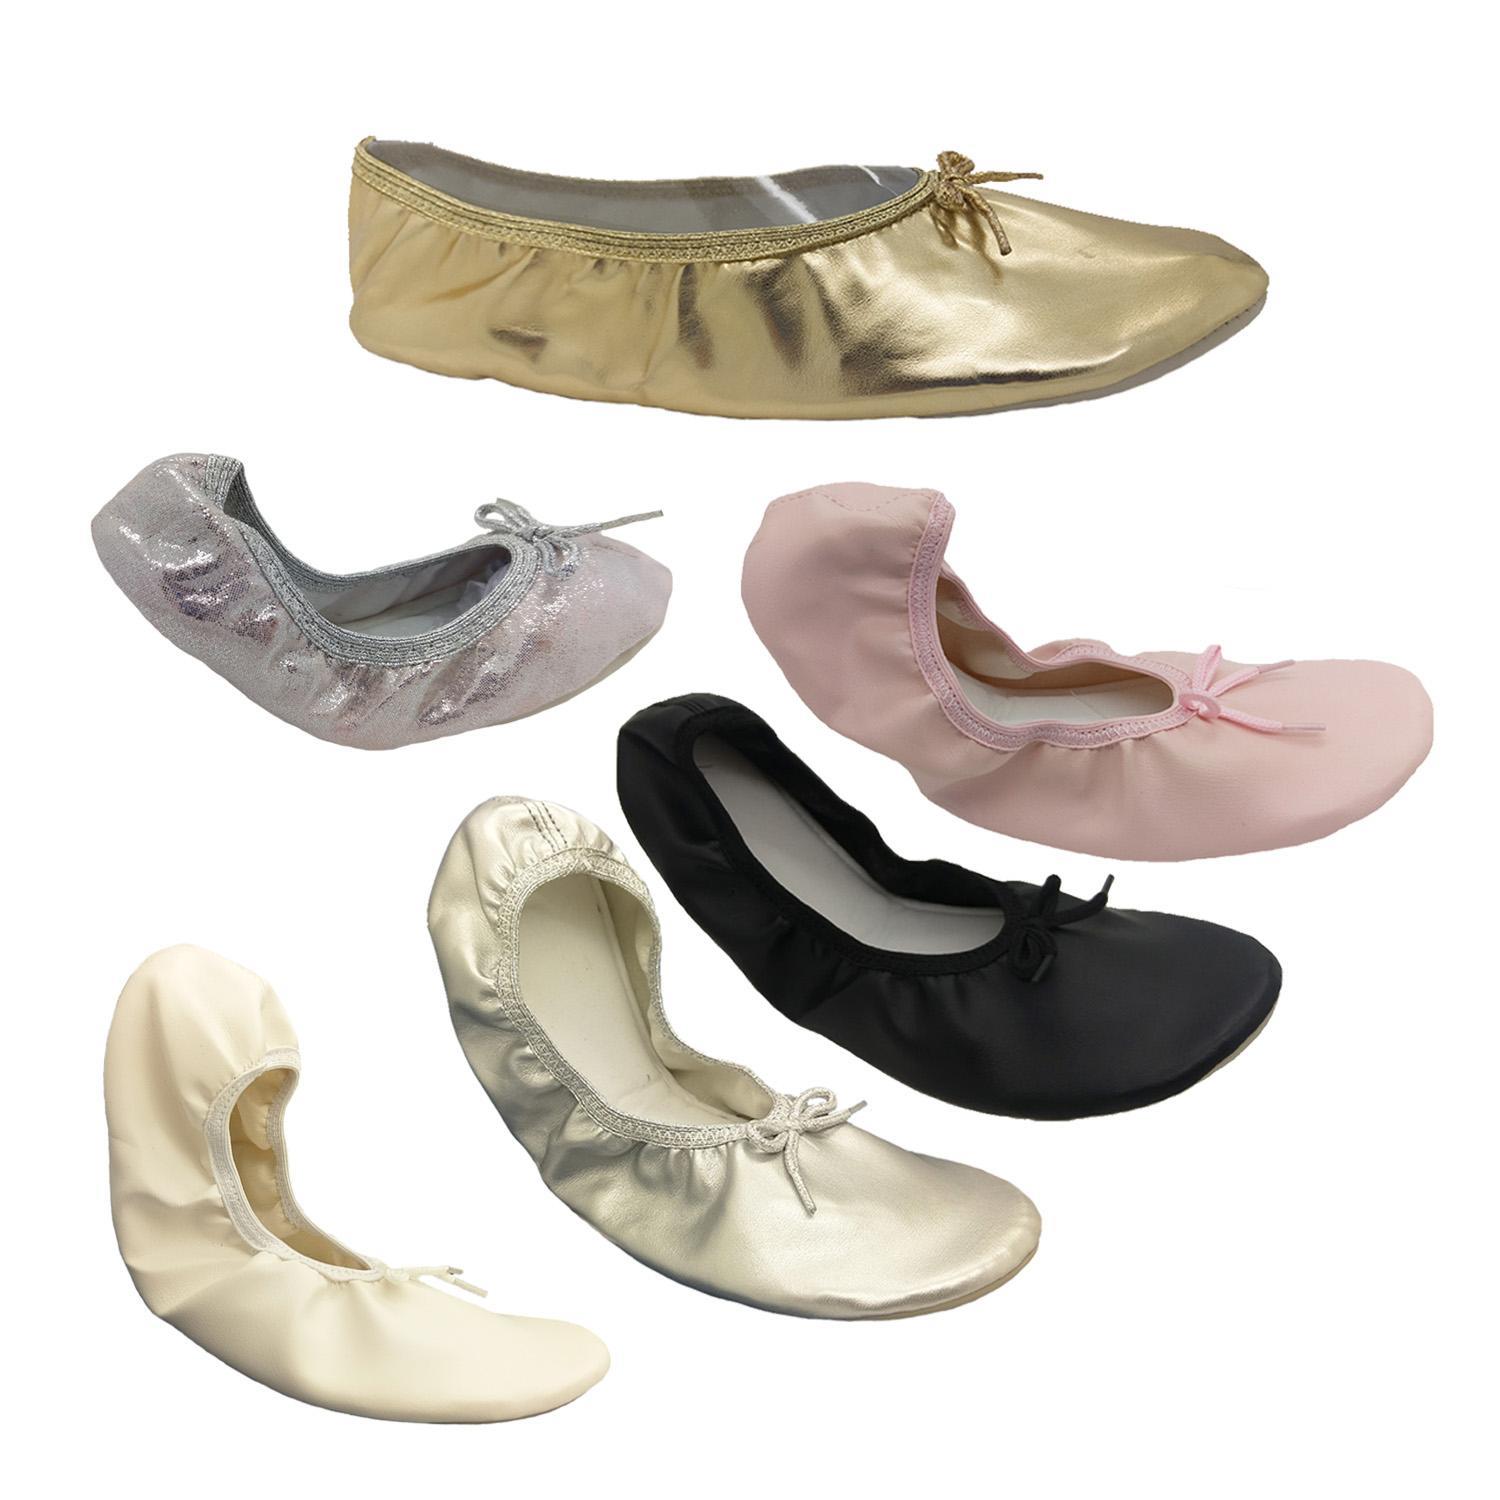 Girls Genuine Jiffies Classic Ballet Flats Elastic Edge Soft Insole Size 5 - 3-Silver Distressed-9-10